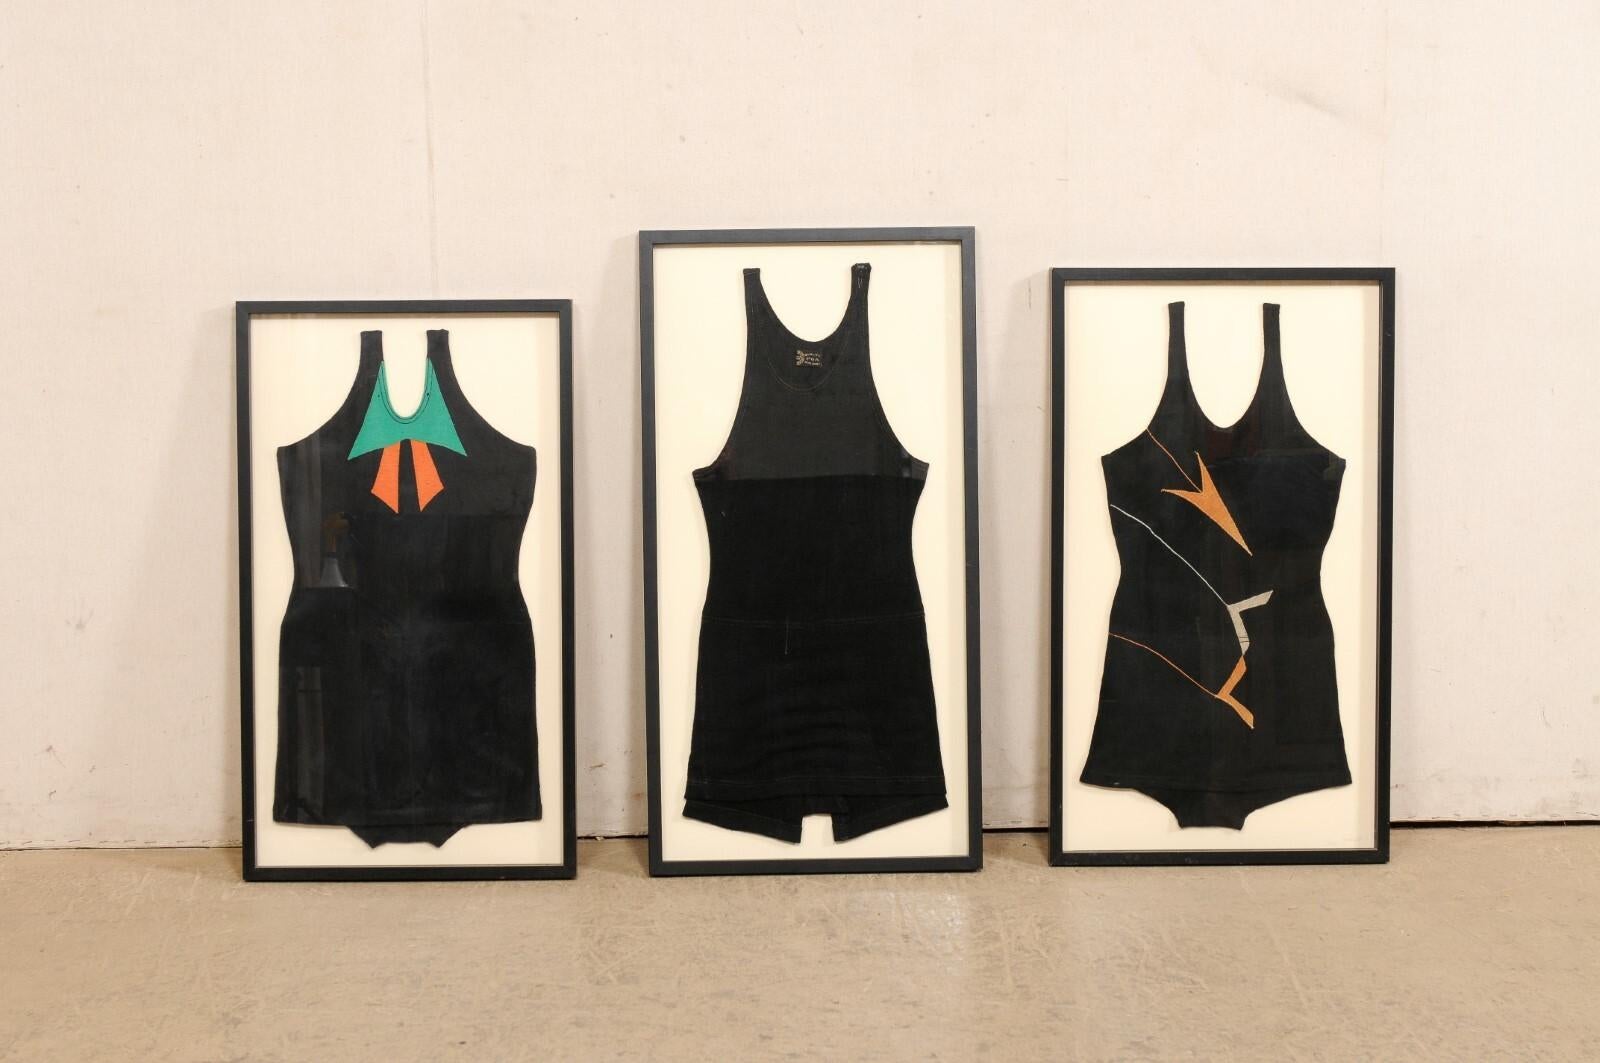 A set of three framed bathing suits from the 1920's. This collection of antique swimwear is comprised of two female swimsuits and a male suit which are beautifully displayed within sleek and contemporary black .75